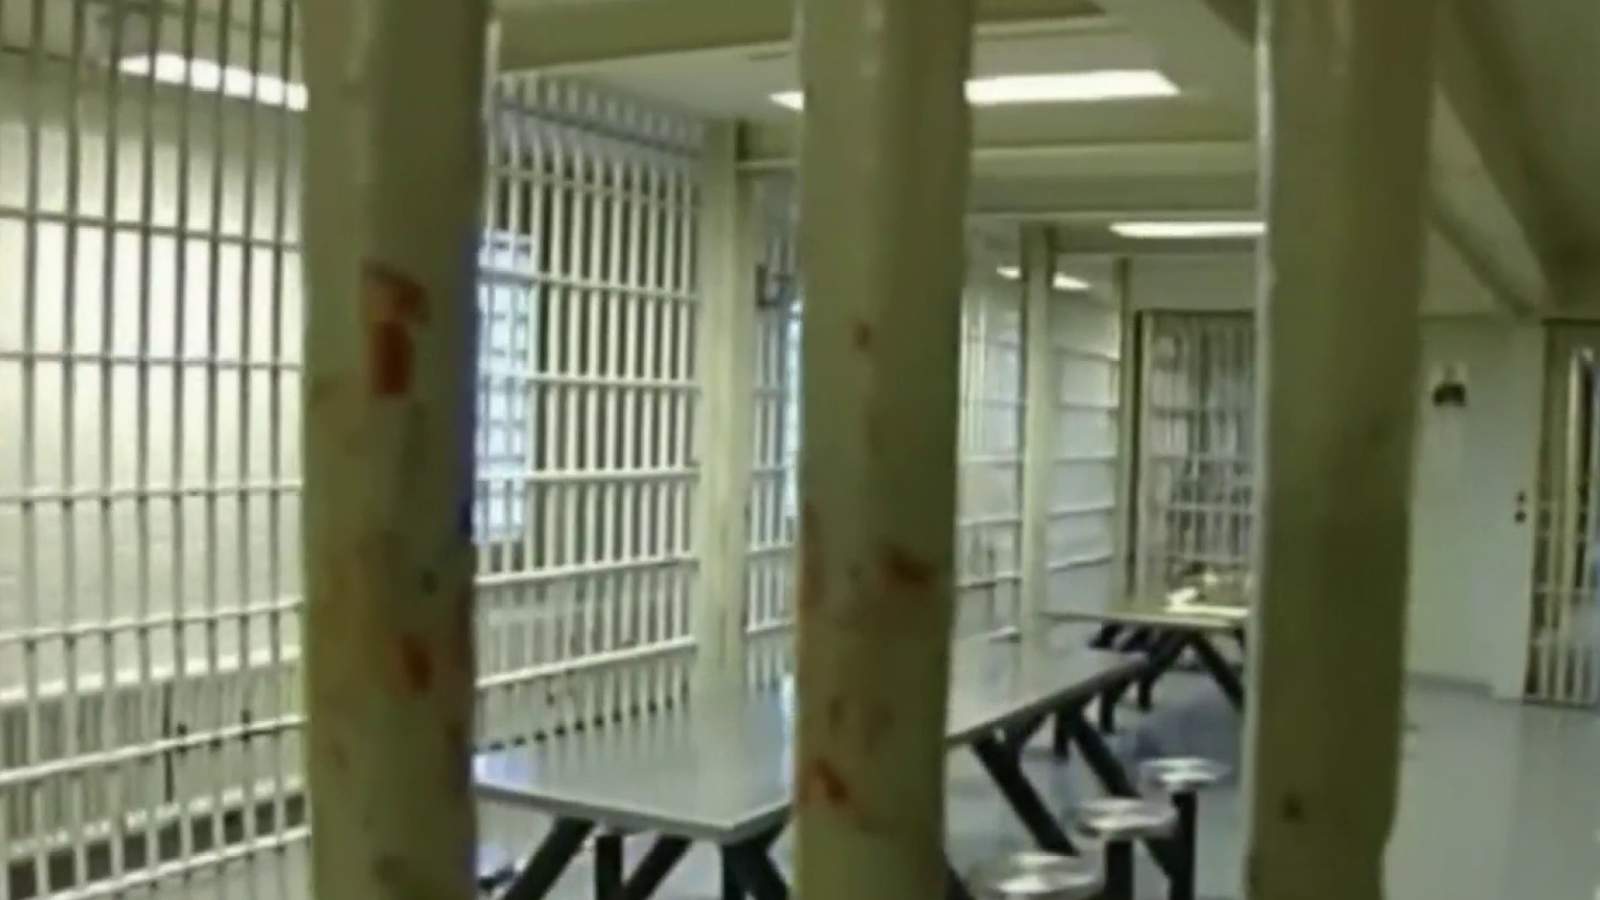 New laws look to overhaul Michigan’s parole, probation system